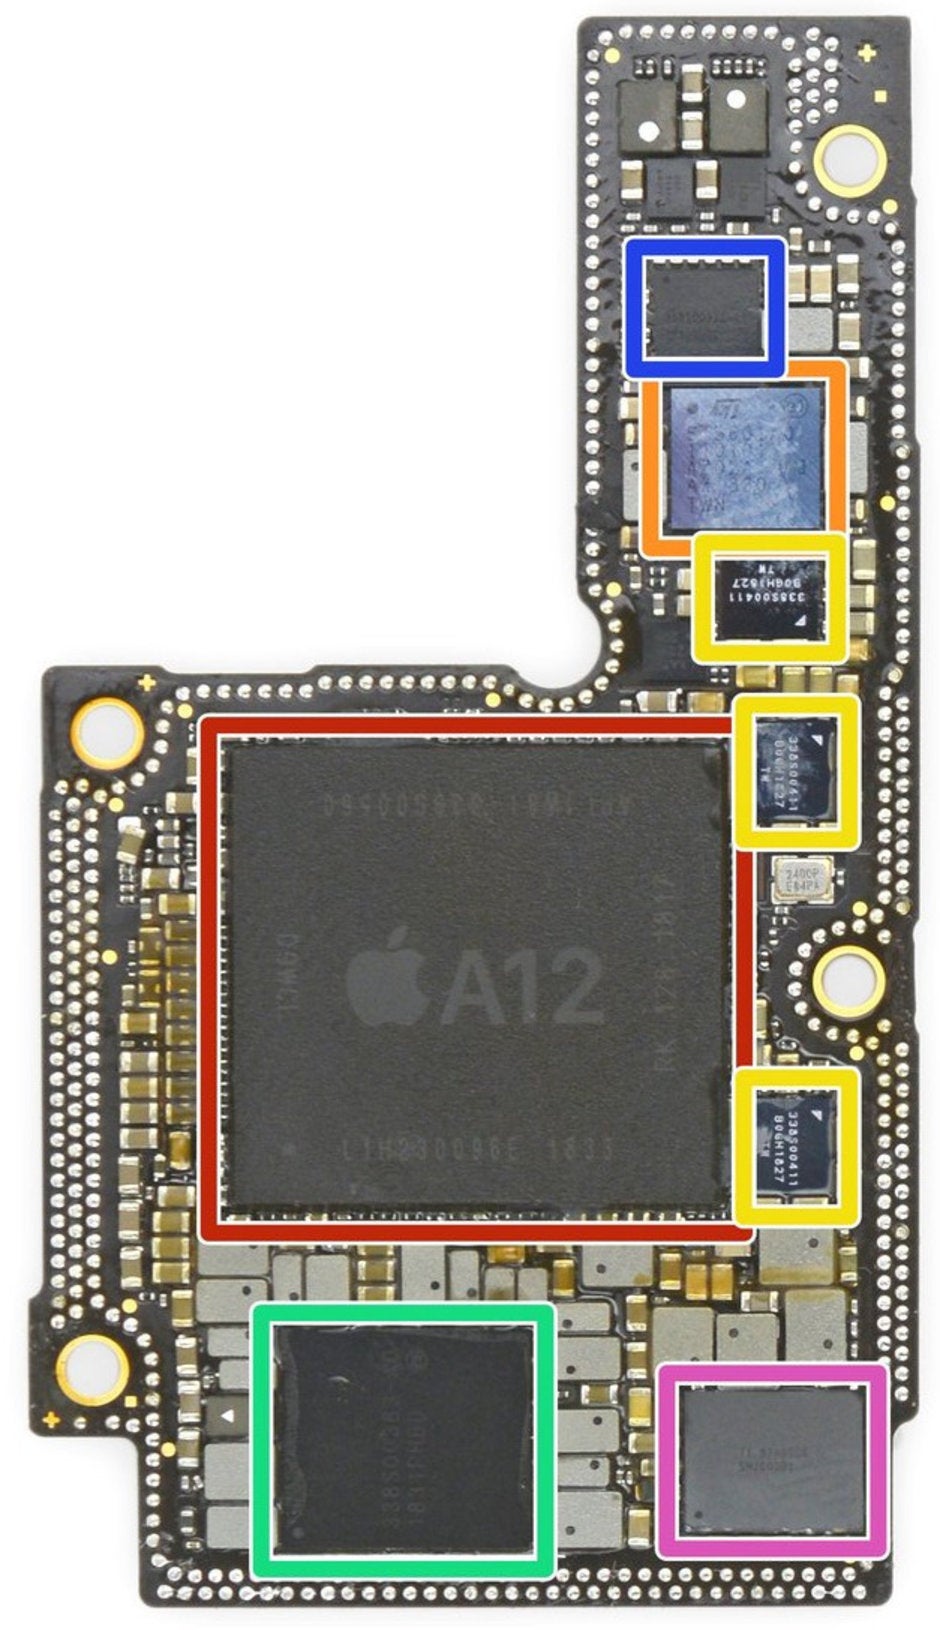 iFixit reveals the L-shaped iPhones XS motherboard - Repair shop leaks the 2019 iPhone logic board, hinting at big changes under the hood